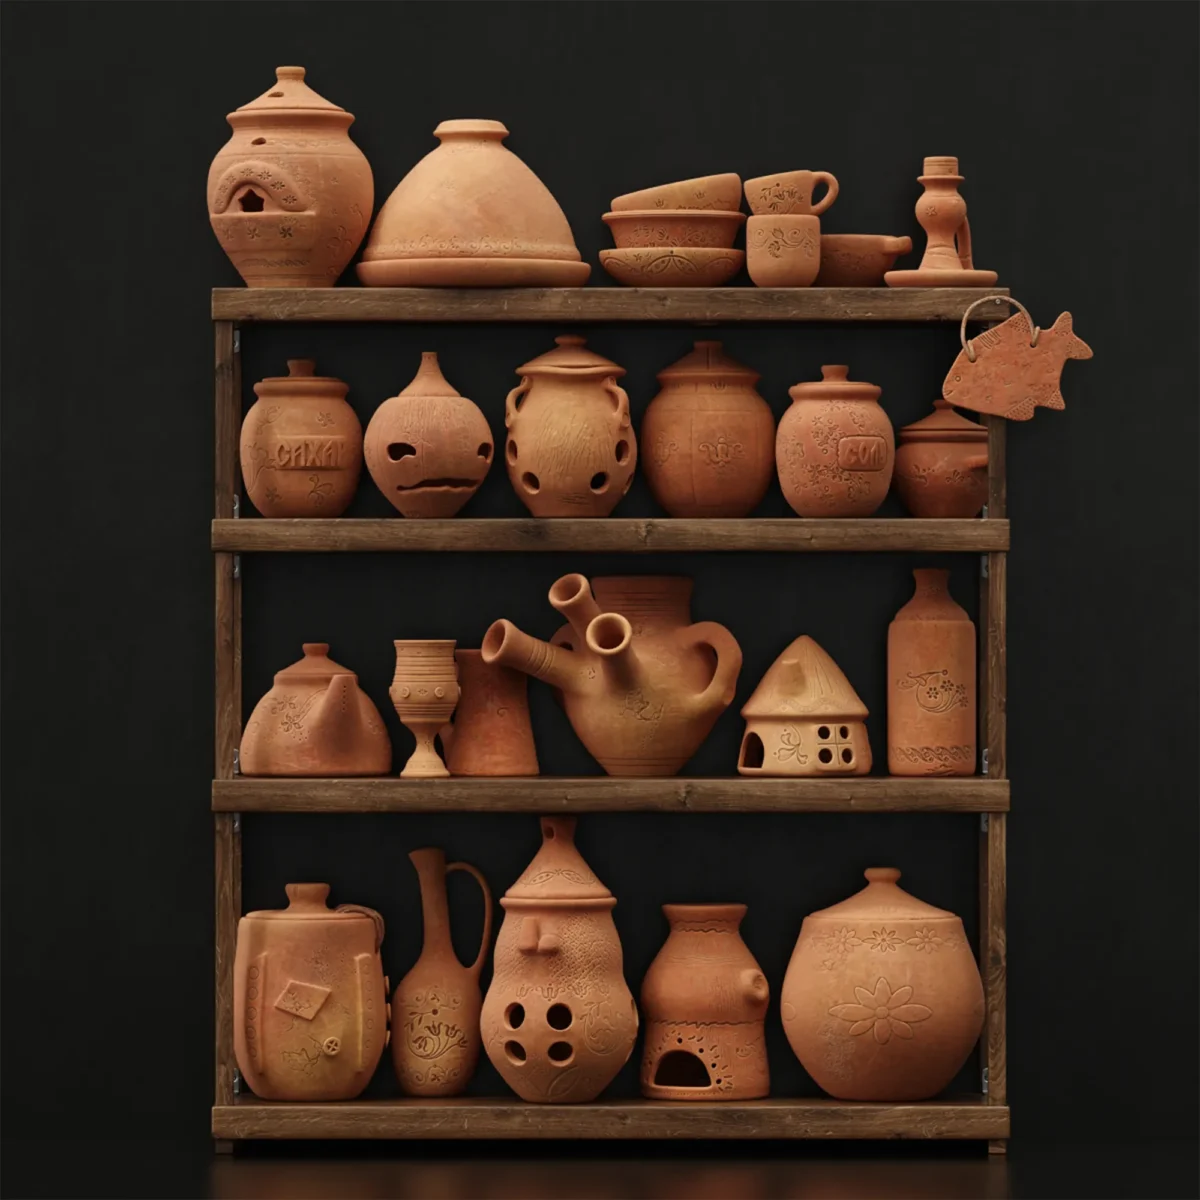 Dishes clay decor N20 3D model download on cg.market 3ds max Corona Render V-Ray